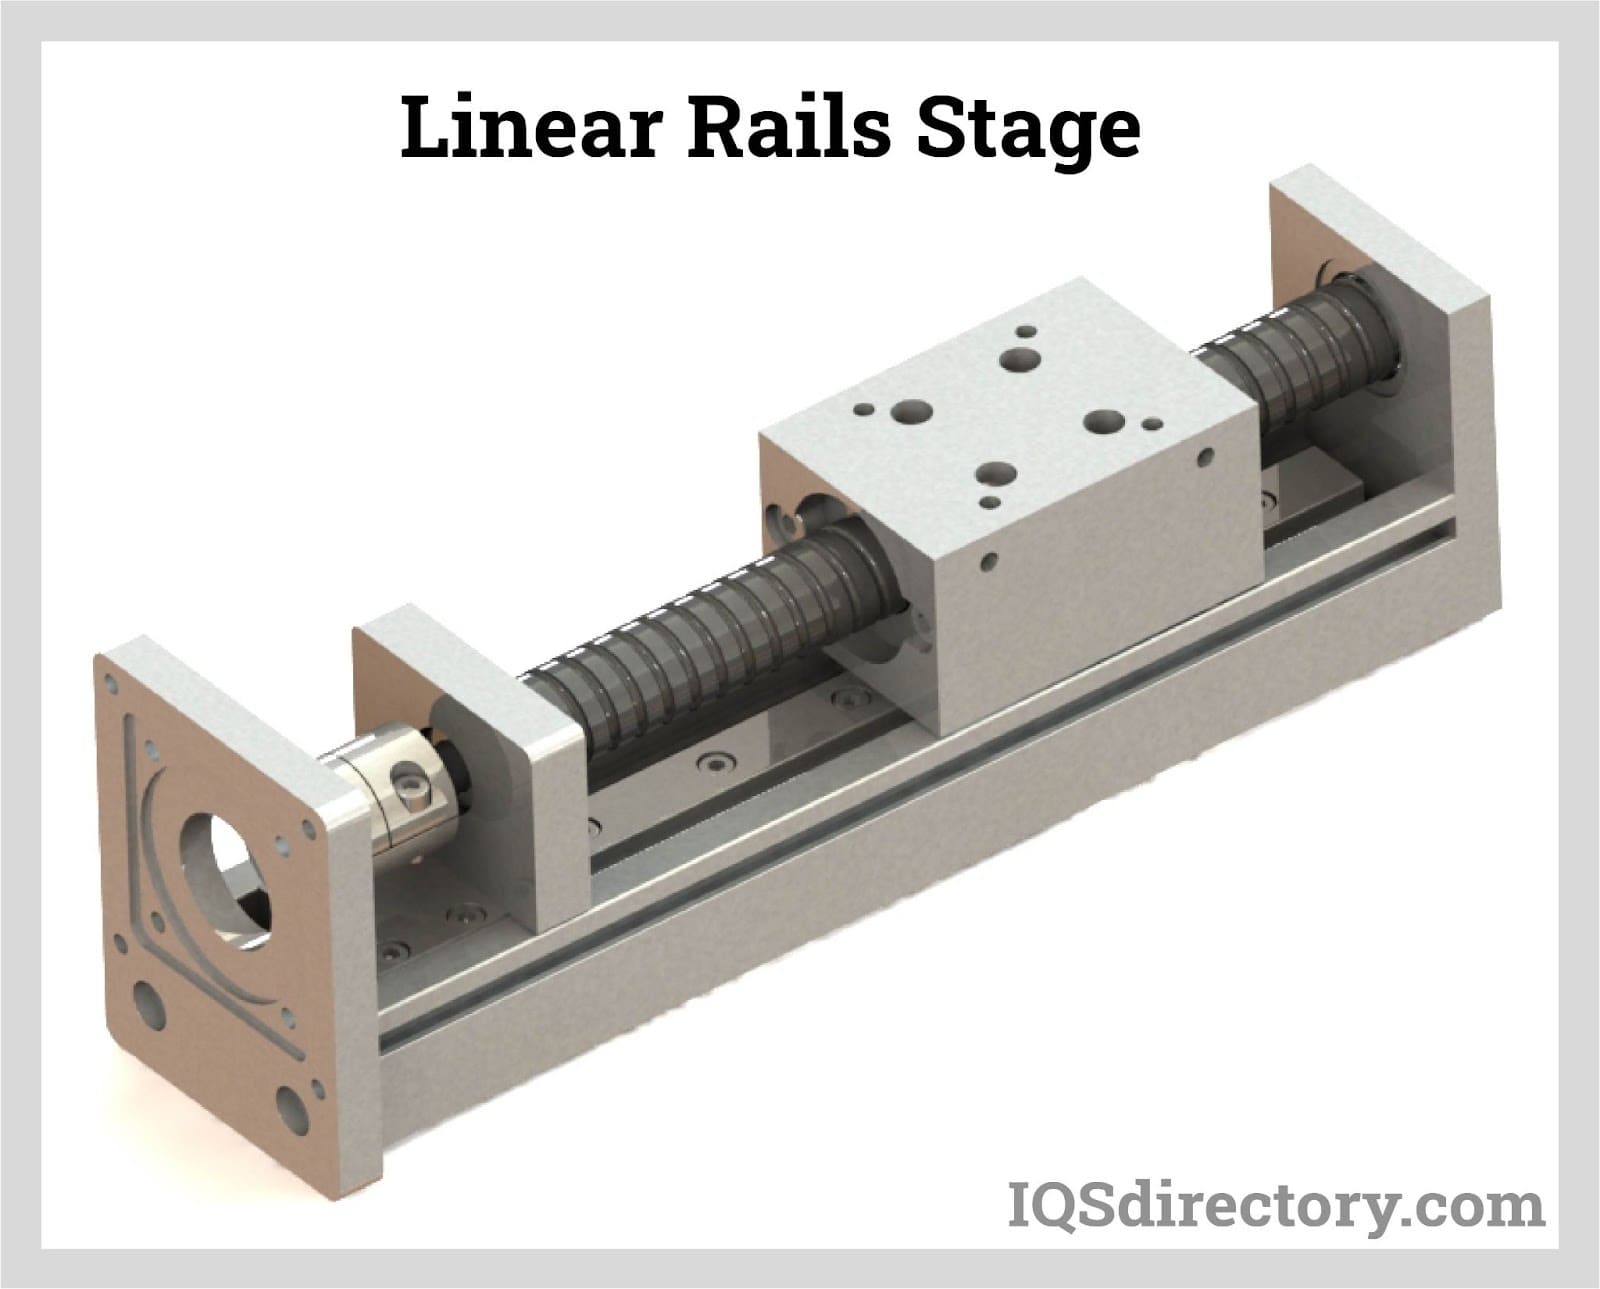 Linear Rails Stage